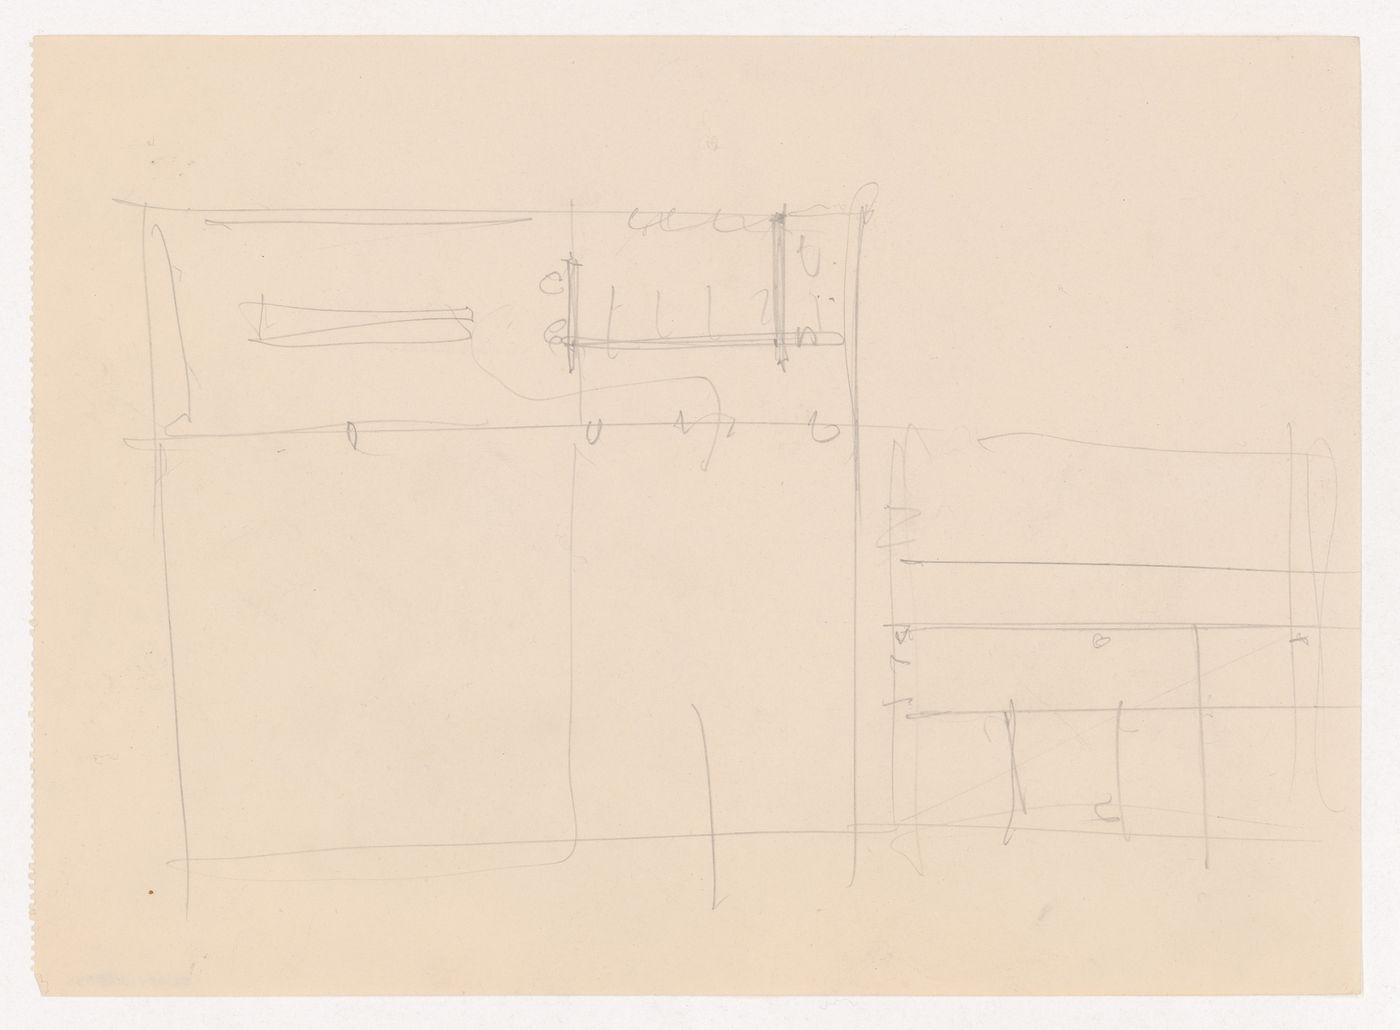 Sketch plan, probably for the Gymnasium